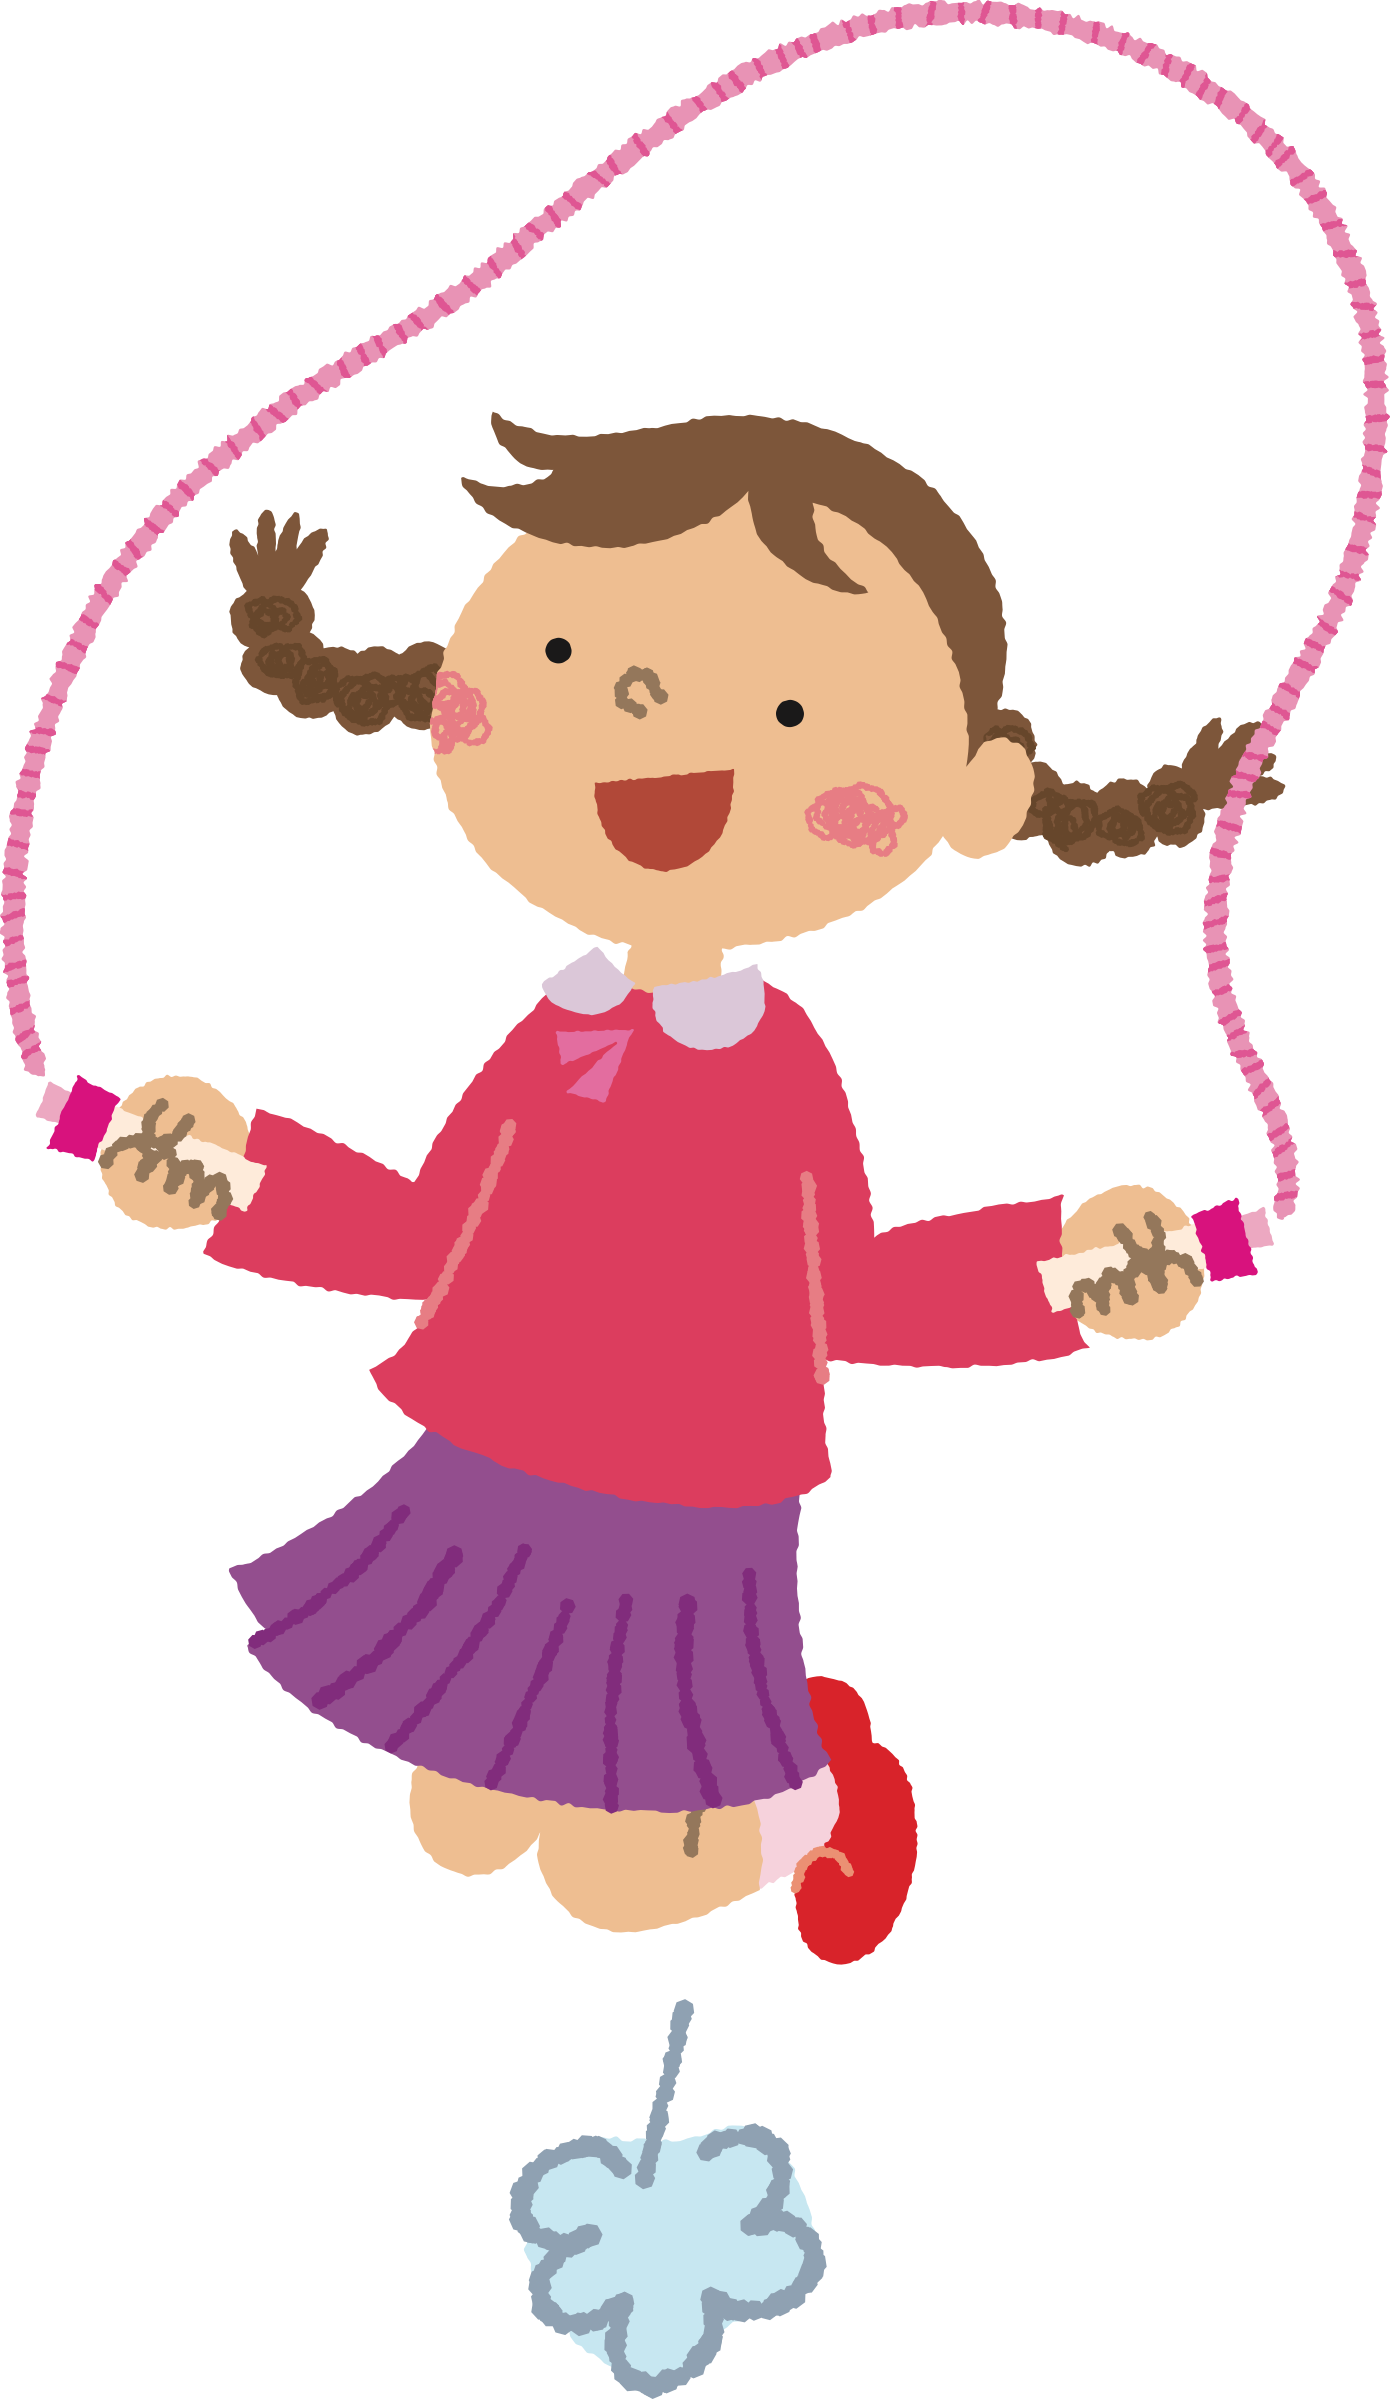 Picture #1455325 - jump clipart jump rope. jump clipart jump rope. 